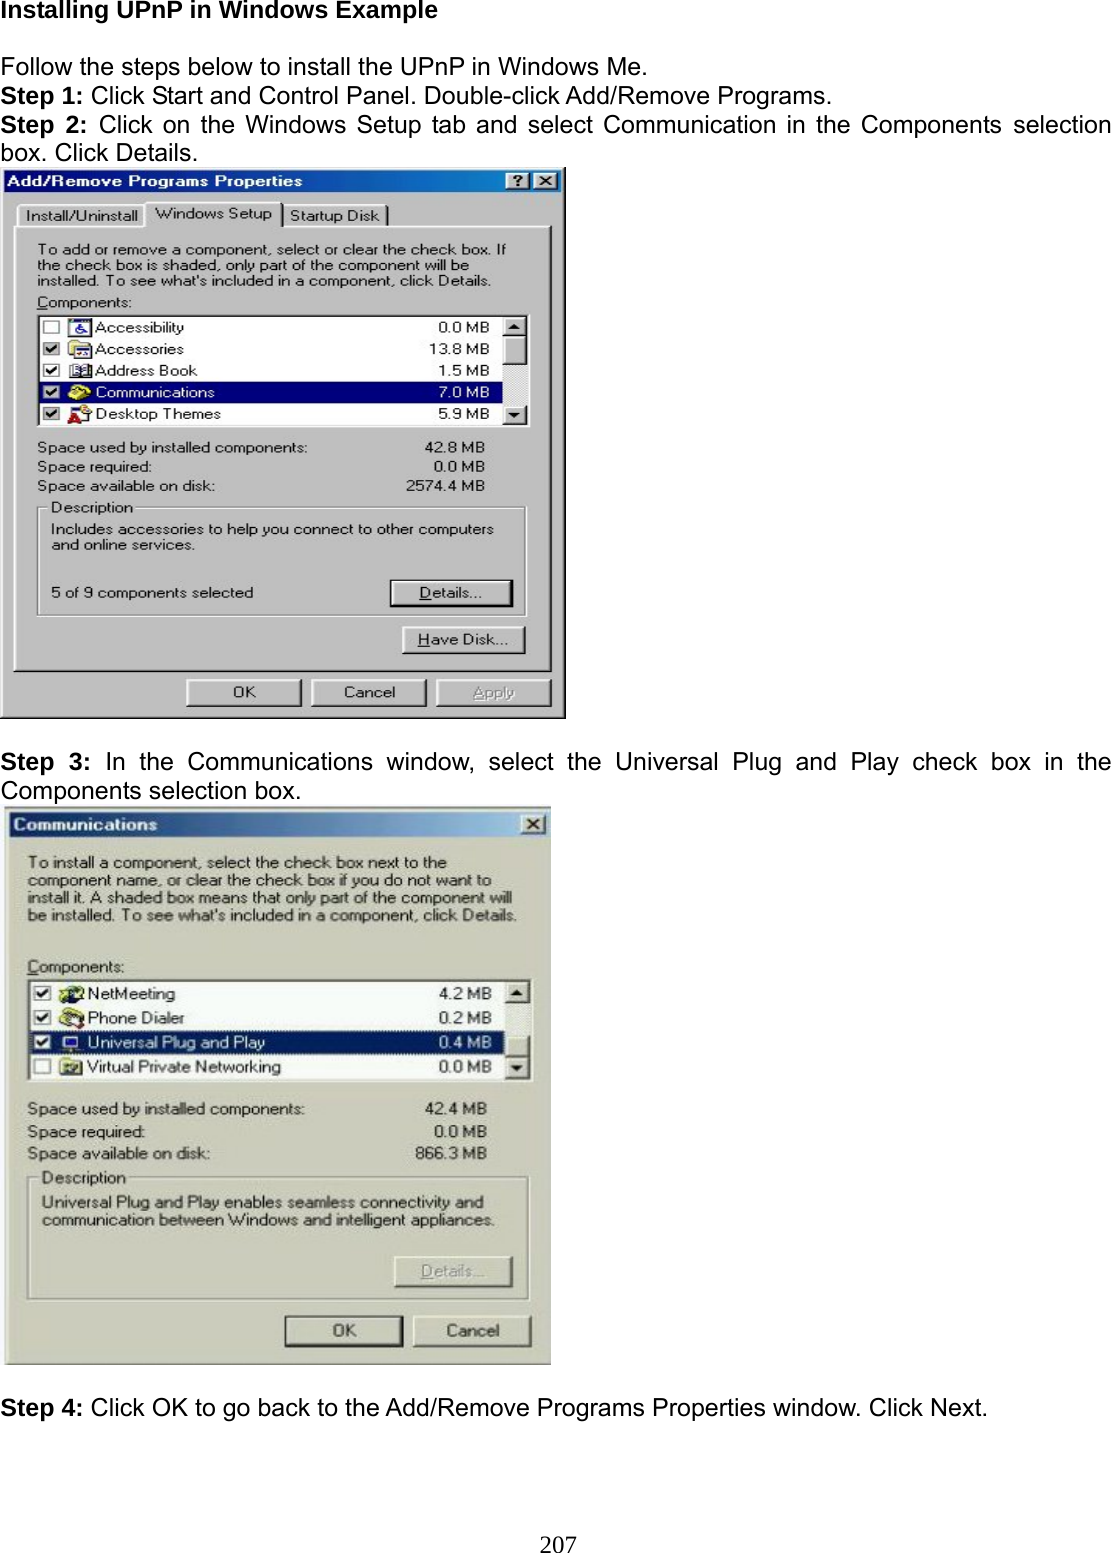 207 Installing UPnP in Windows Example  Follow the steps below to install the UPnP in Windows Me. Step 1: Click Start and Control Panel. Double-click Add/Remove Programs. Step 2: Click on the Windows Setup tab and select Communication in the Components selection box. Click Details.   Step 3: In the Communications window, select the Universal Plug and Play check box in the Components selection box.    Step 4: Click OK to go back to the Add/Remove Programs Properties window. Click Next. 